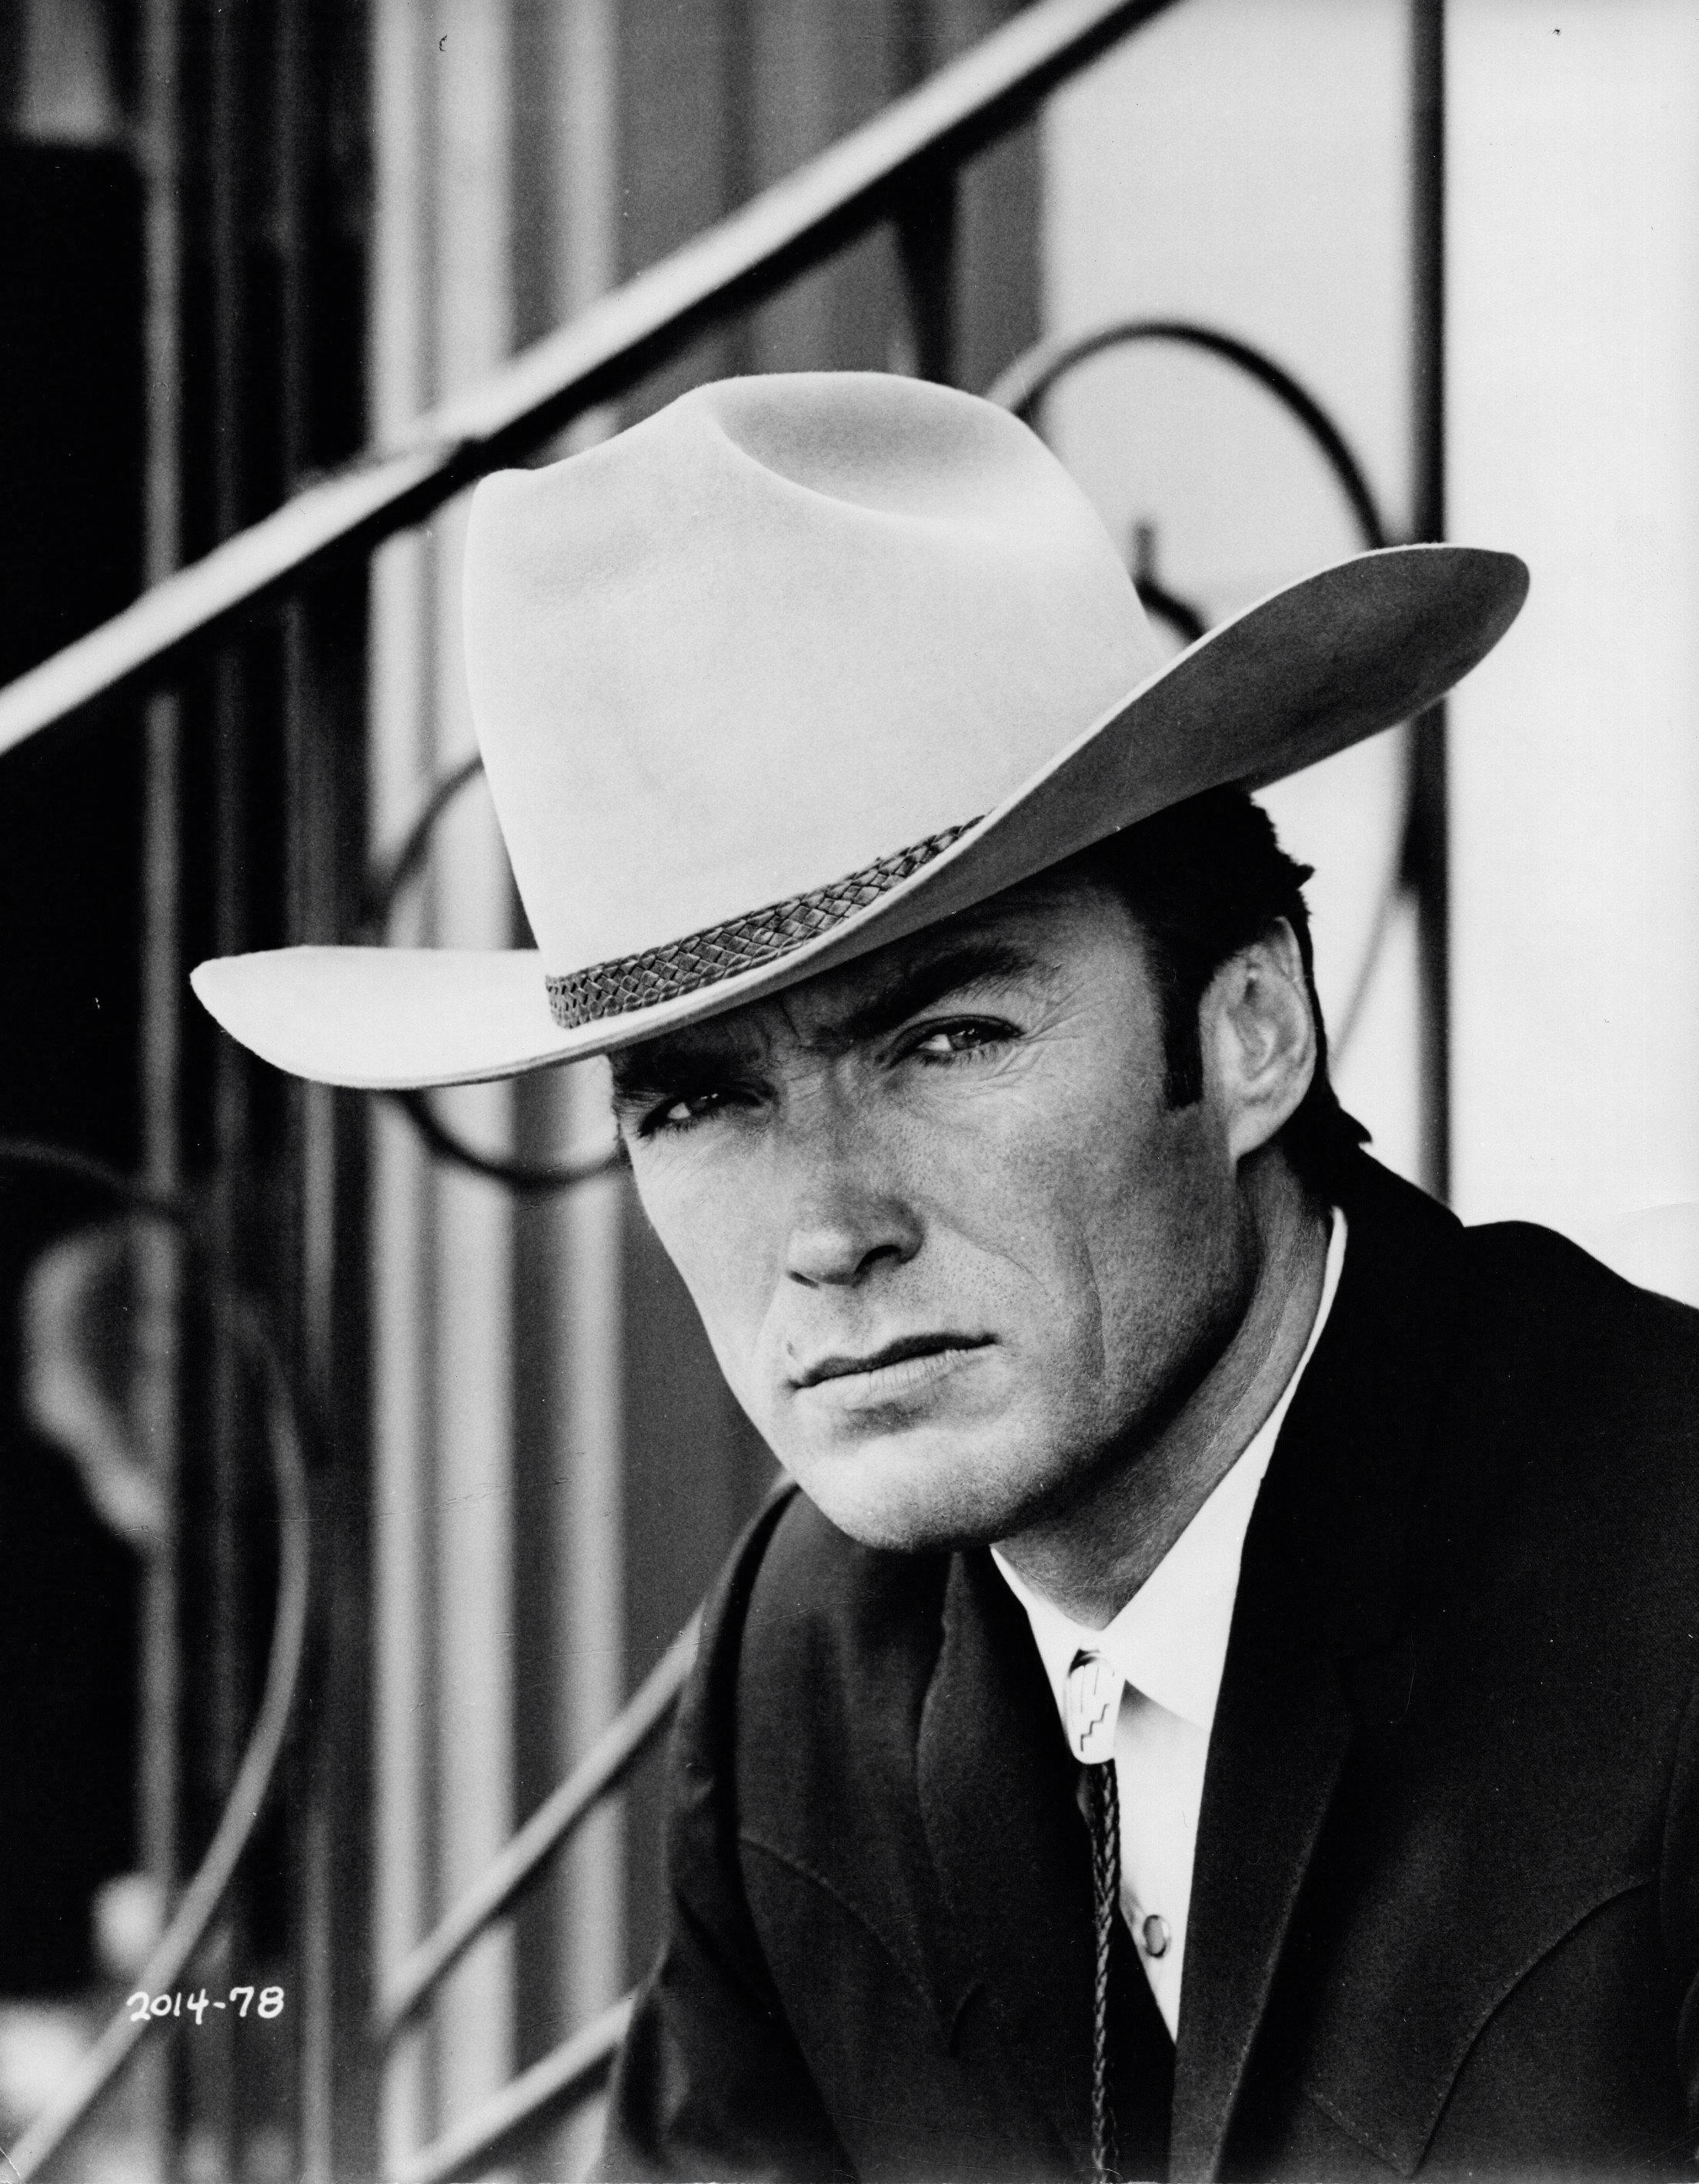 Unknown Black and White Photograph - Clint Eastwood in Cowboy Hat Vintage Original Photograph